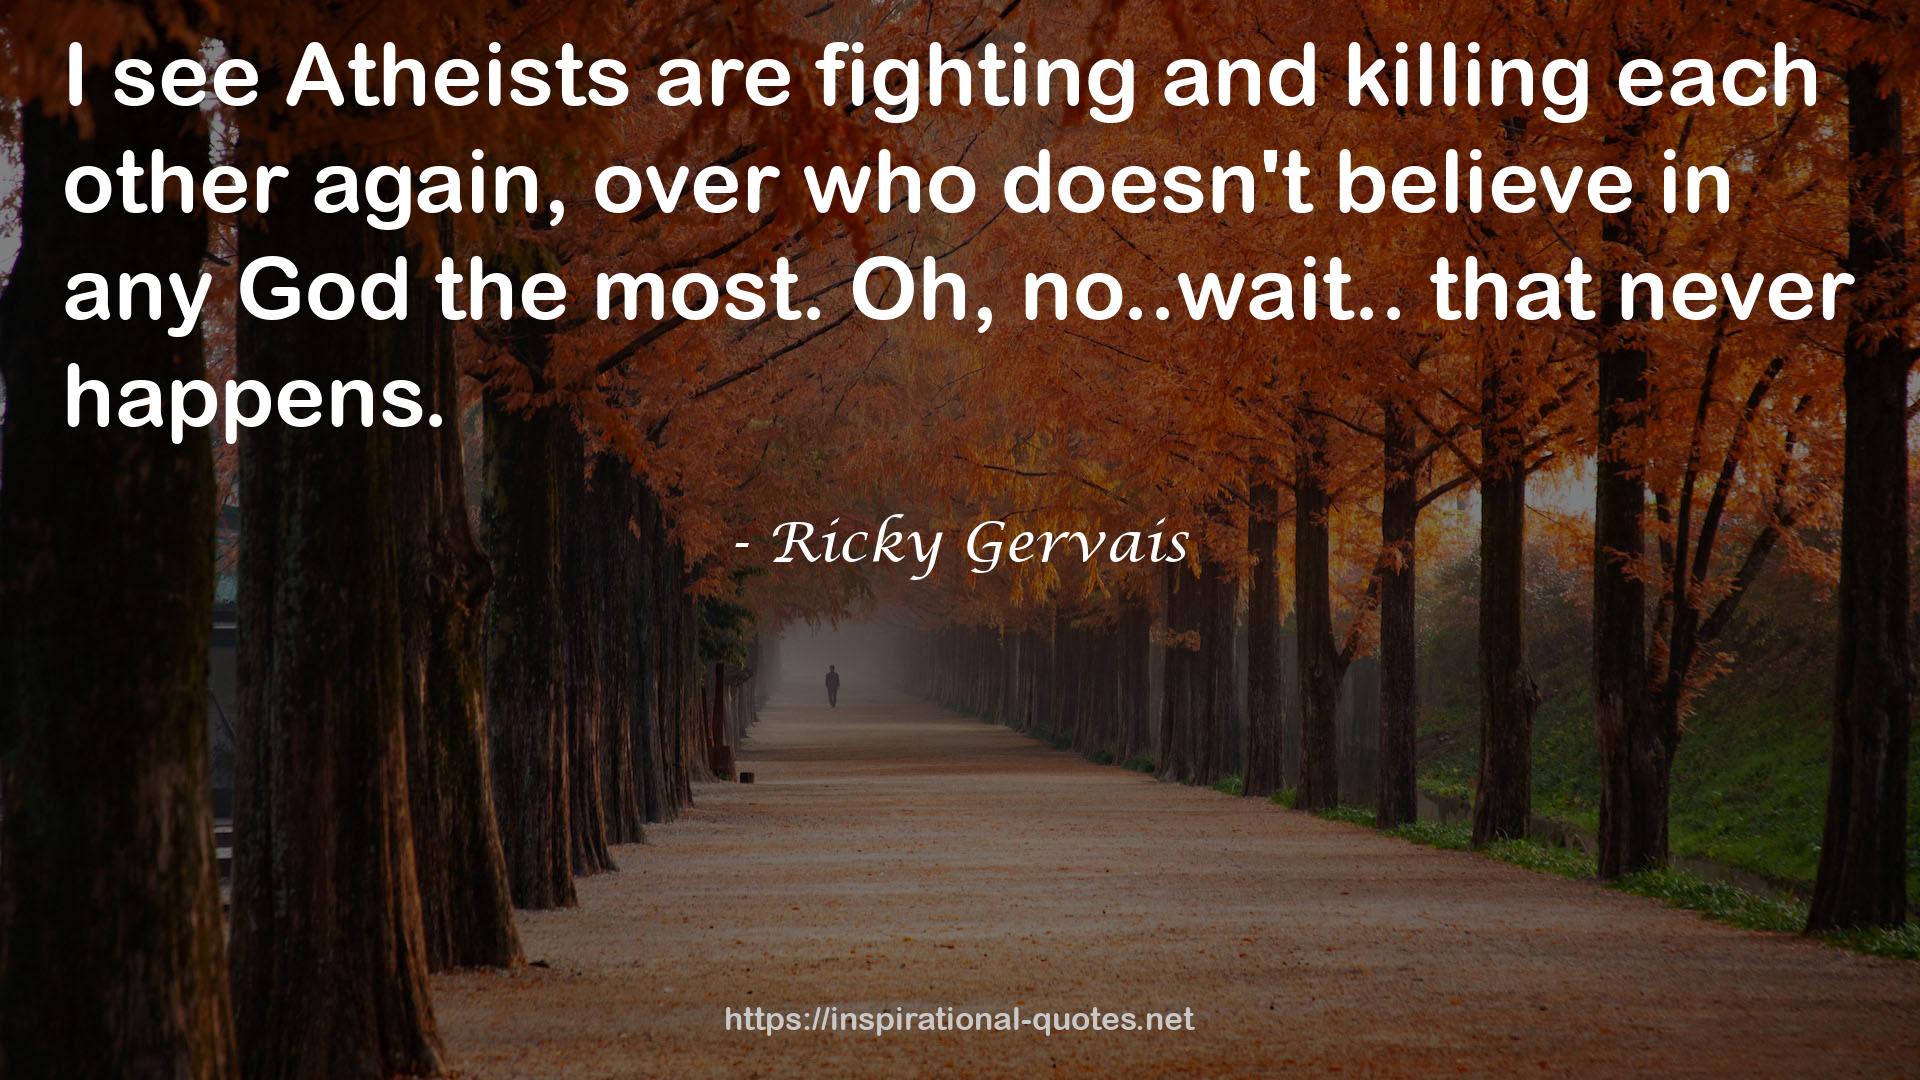 Ricky Gervais QUOTES